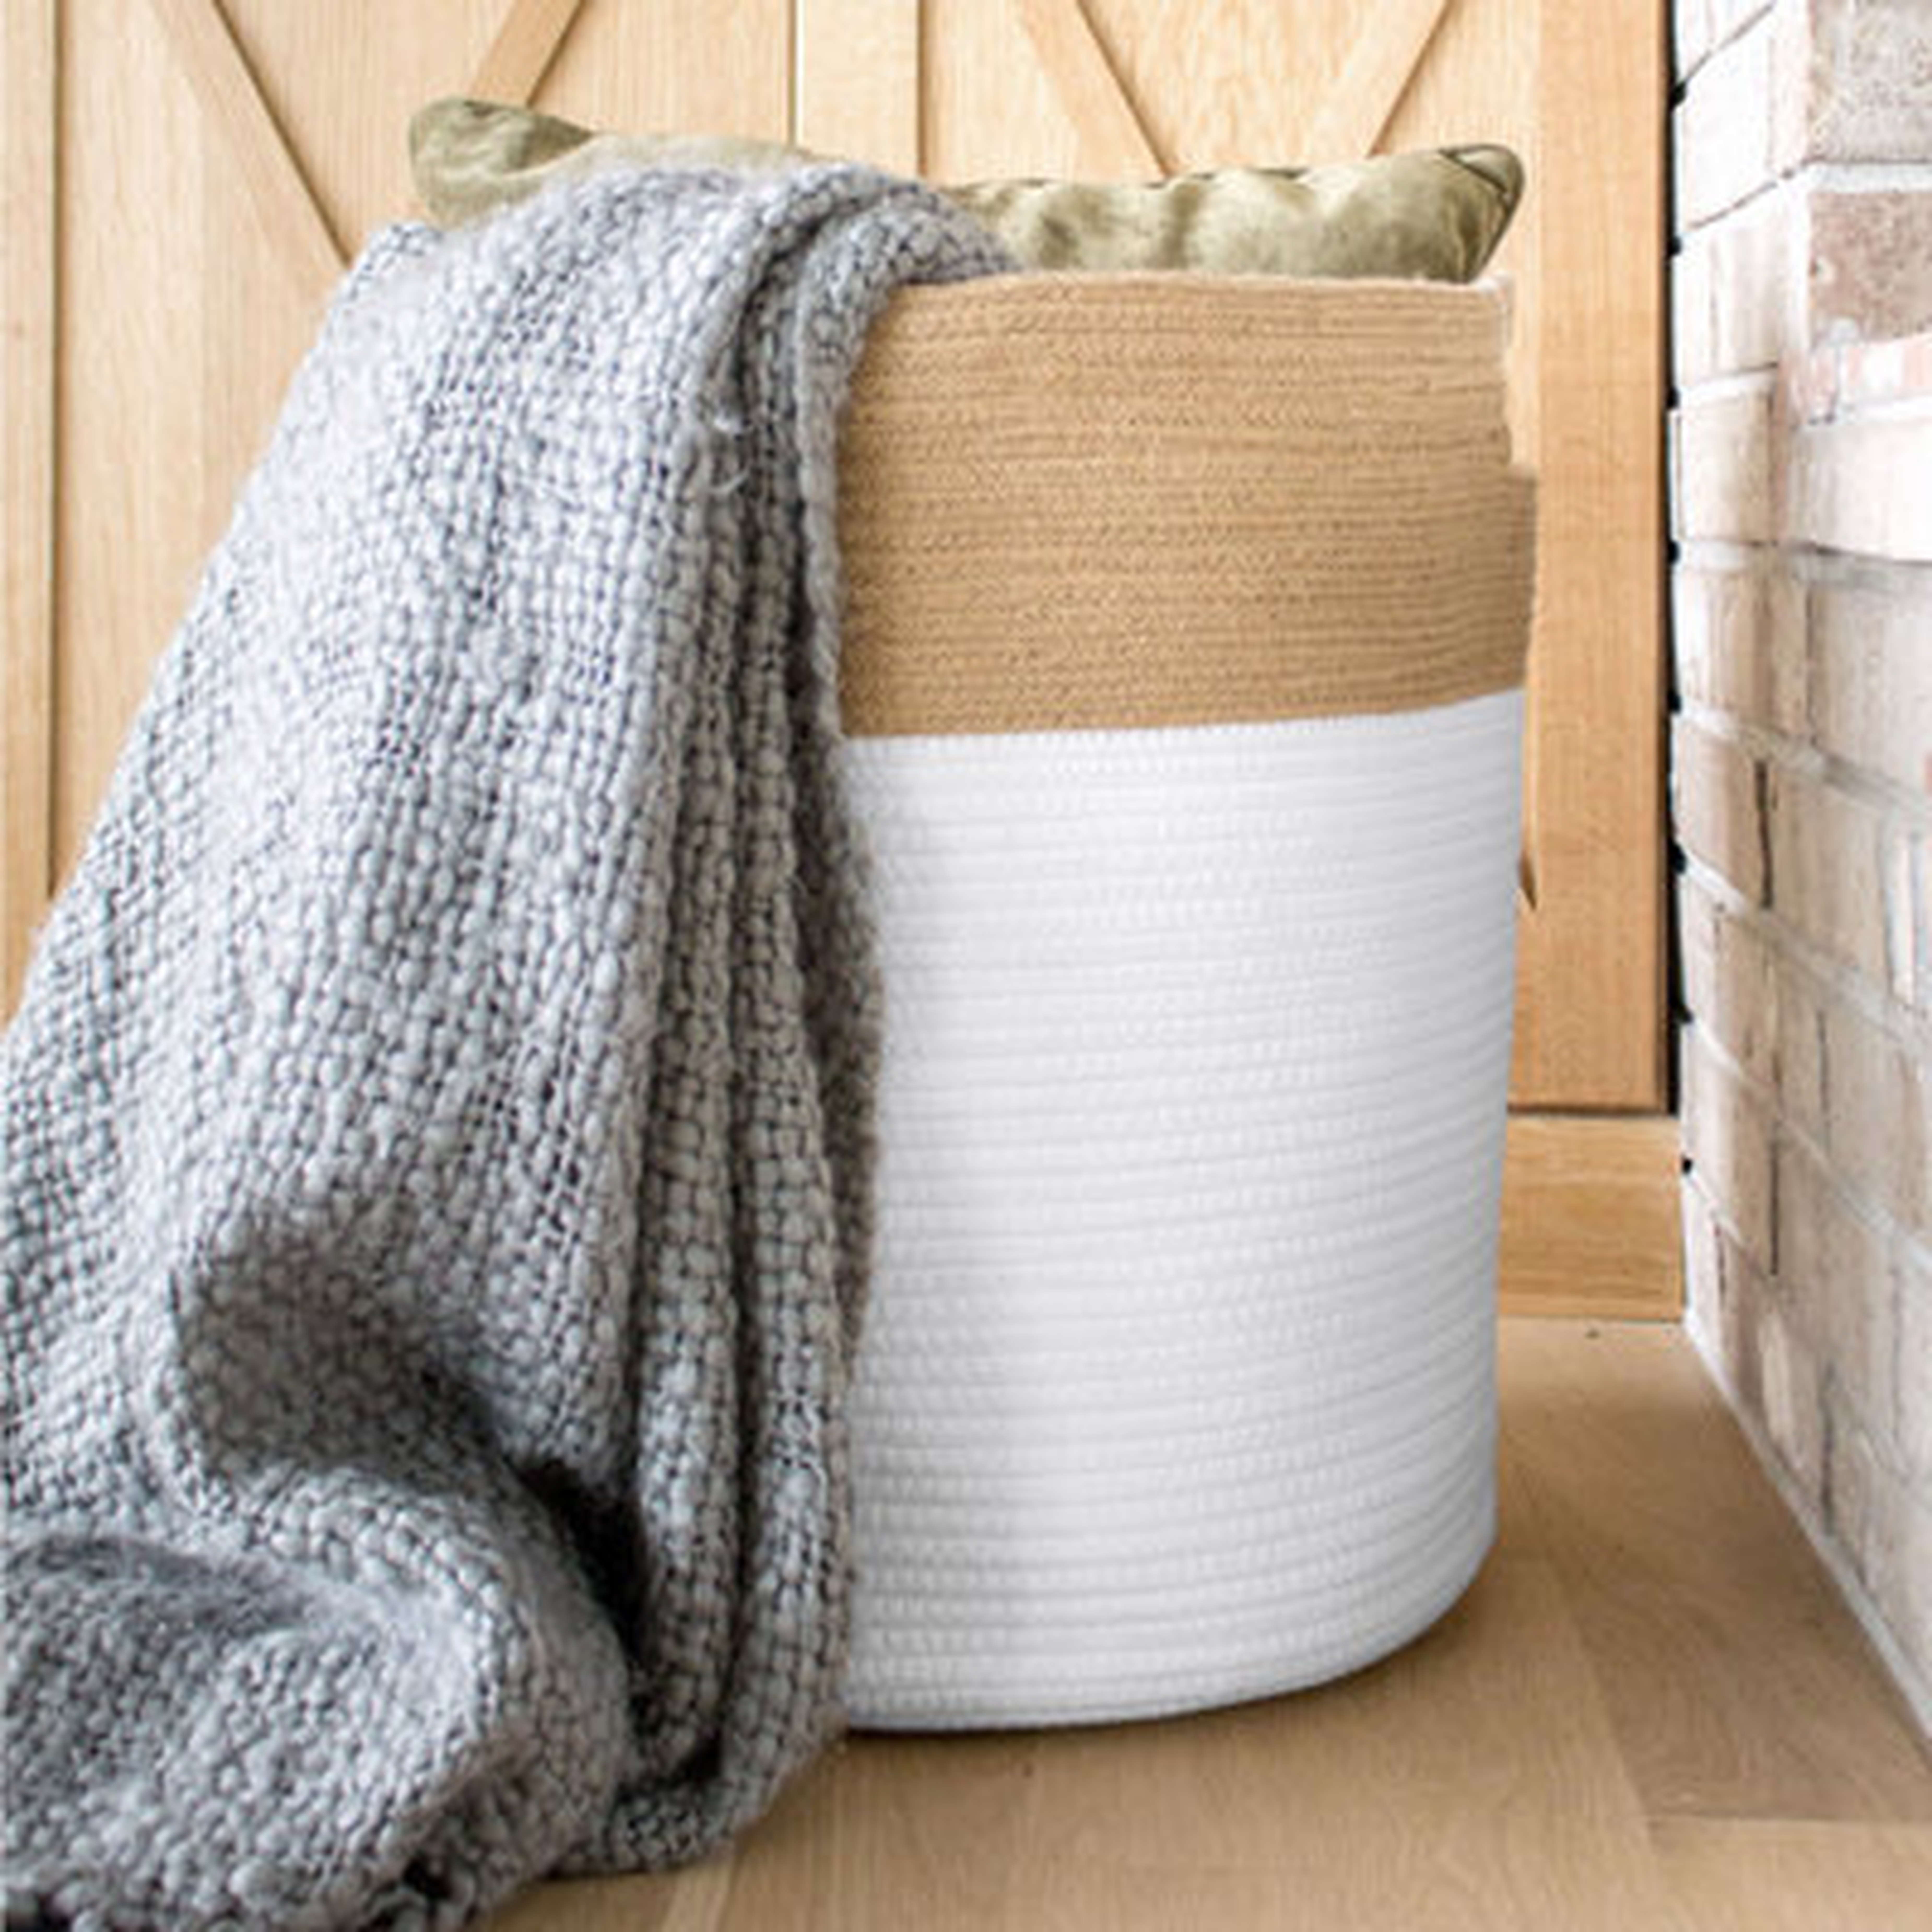 Extra Large Tall Woven Rope Storage Basket Jute White Handles | Decorative Laundry Clothes Hamper, Blanket, Towel, Baby Nursery Diaper, - Wayfair